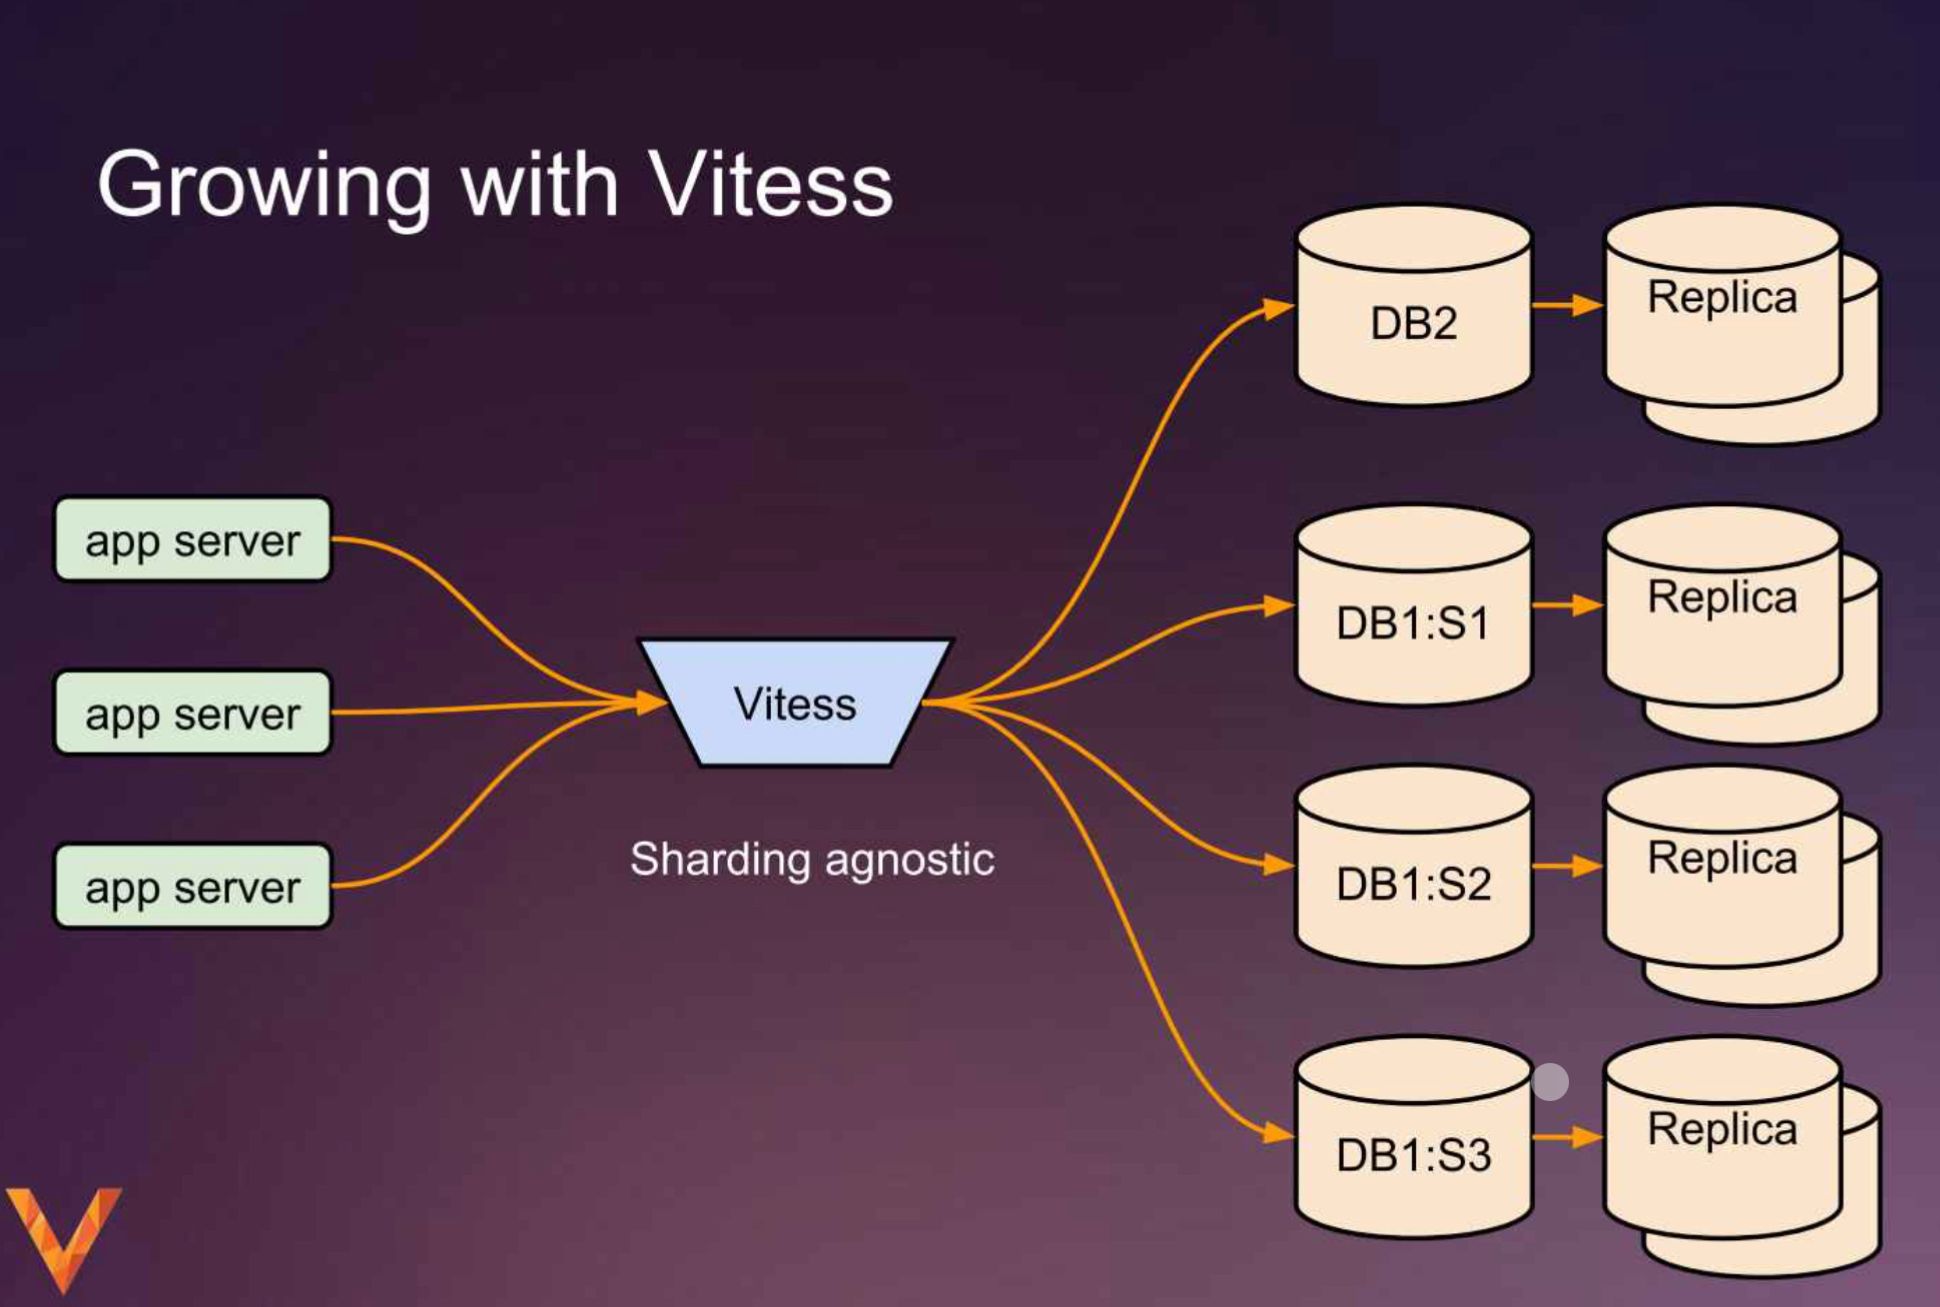 Database technologies, such as Vitess, can provide sharding agnostic solutions